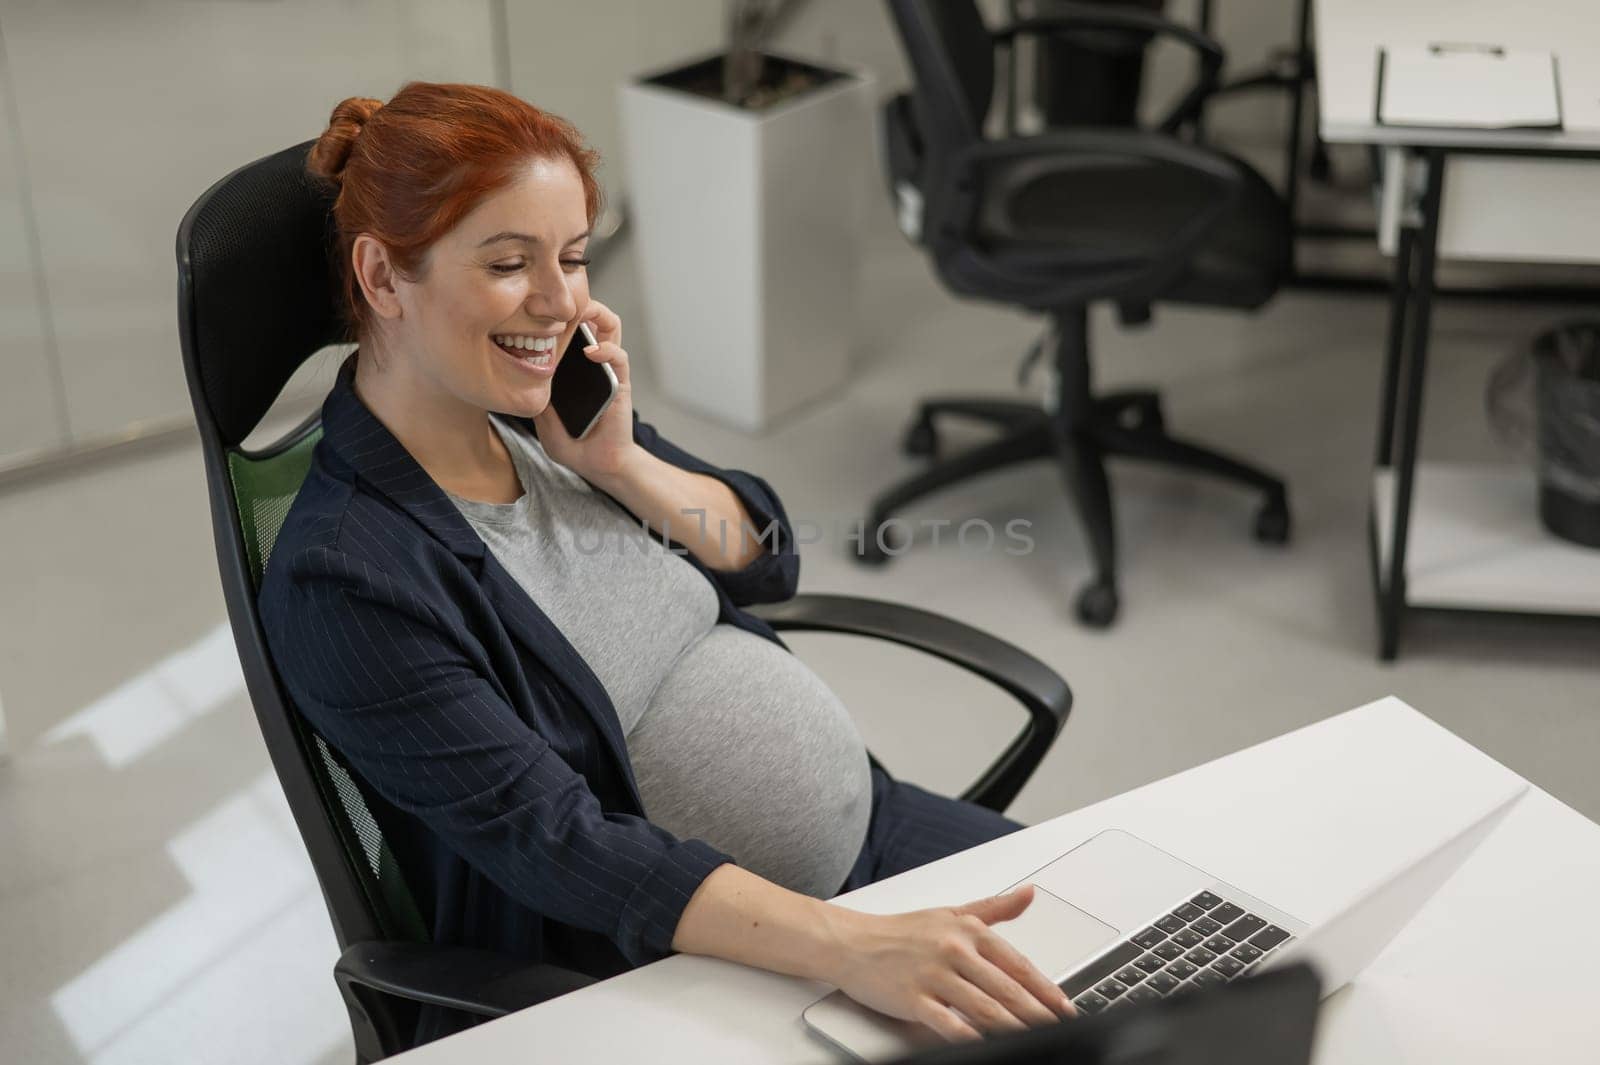 Pregnant woman using mobile phone in office. by mrwed54